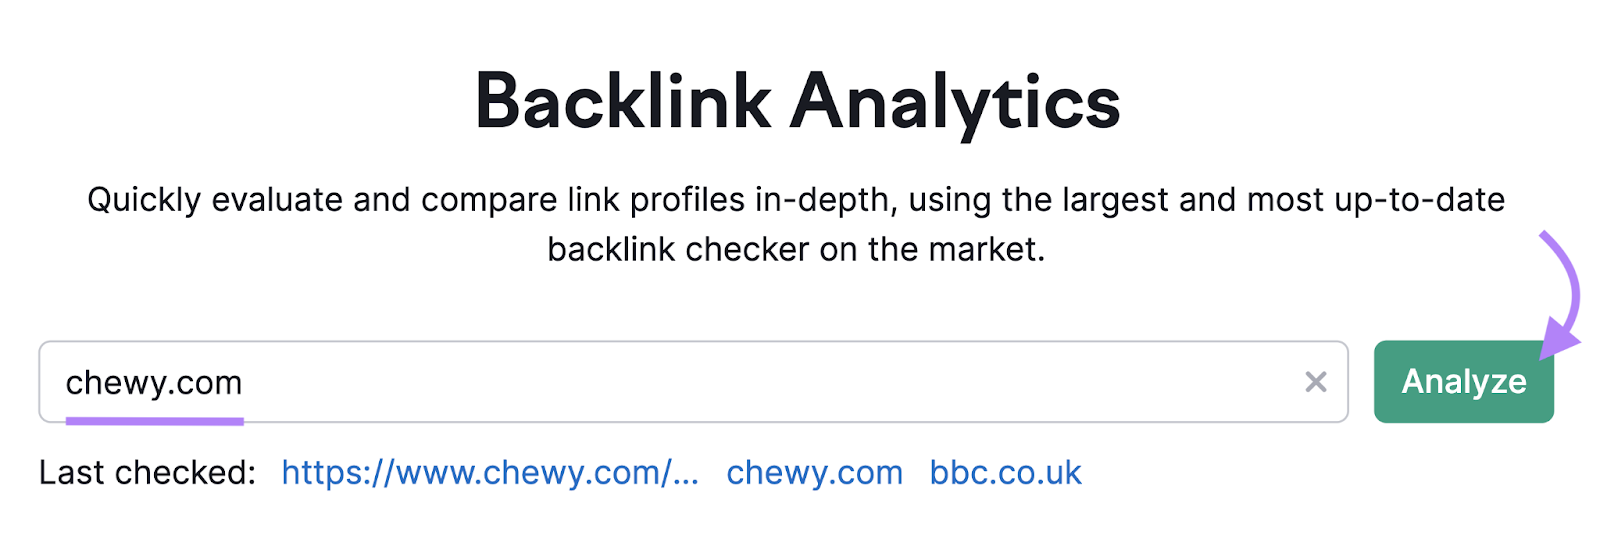 search chewy.com in backlink analytics tool